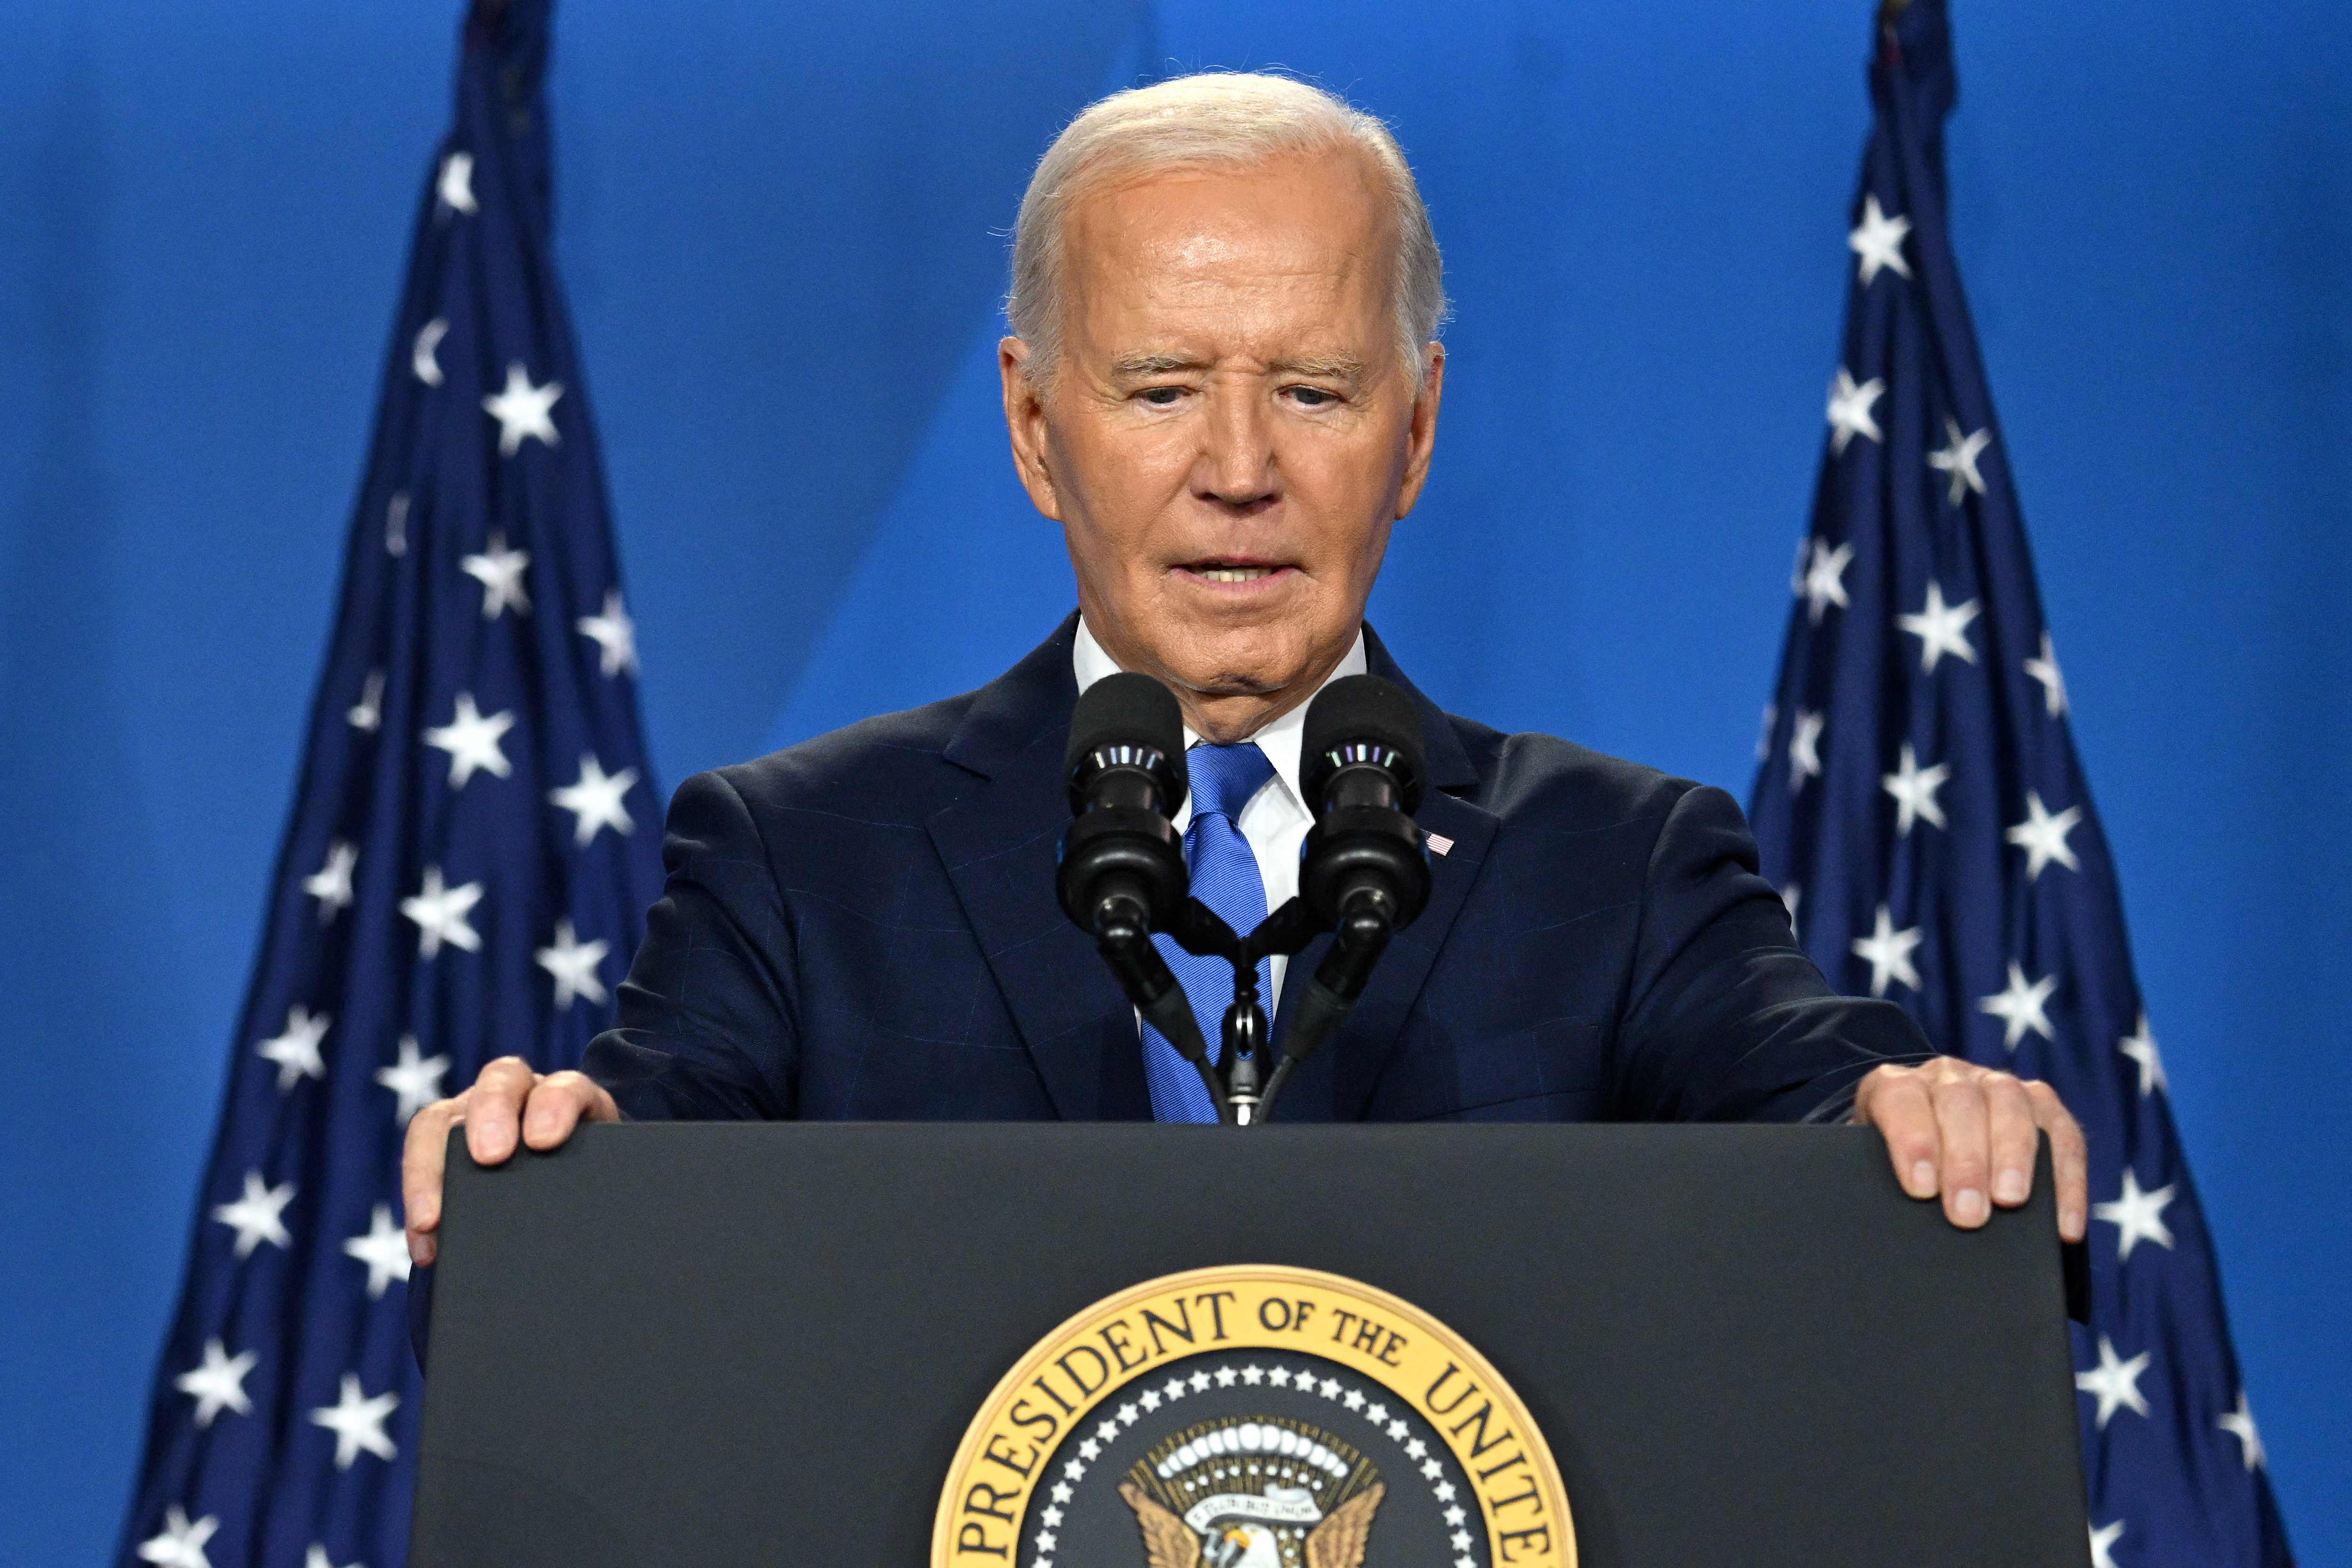 (FILES) US President Joe Biden gestures as he speaks during a press conference at the close of the 75th NATO Summit at the Walter E. Washington Convention Center in Washington, DC on July 11, 2024. US President Joe Biden announced July 21, 2024 that he is dropping out of his reelection battle with Donald Trump, in a historic move that plunges the already turbulent 2024 White House race into uncharted territory. (Photo by SAUL LOEB / AFP)